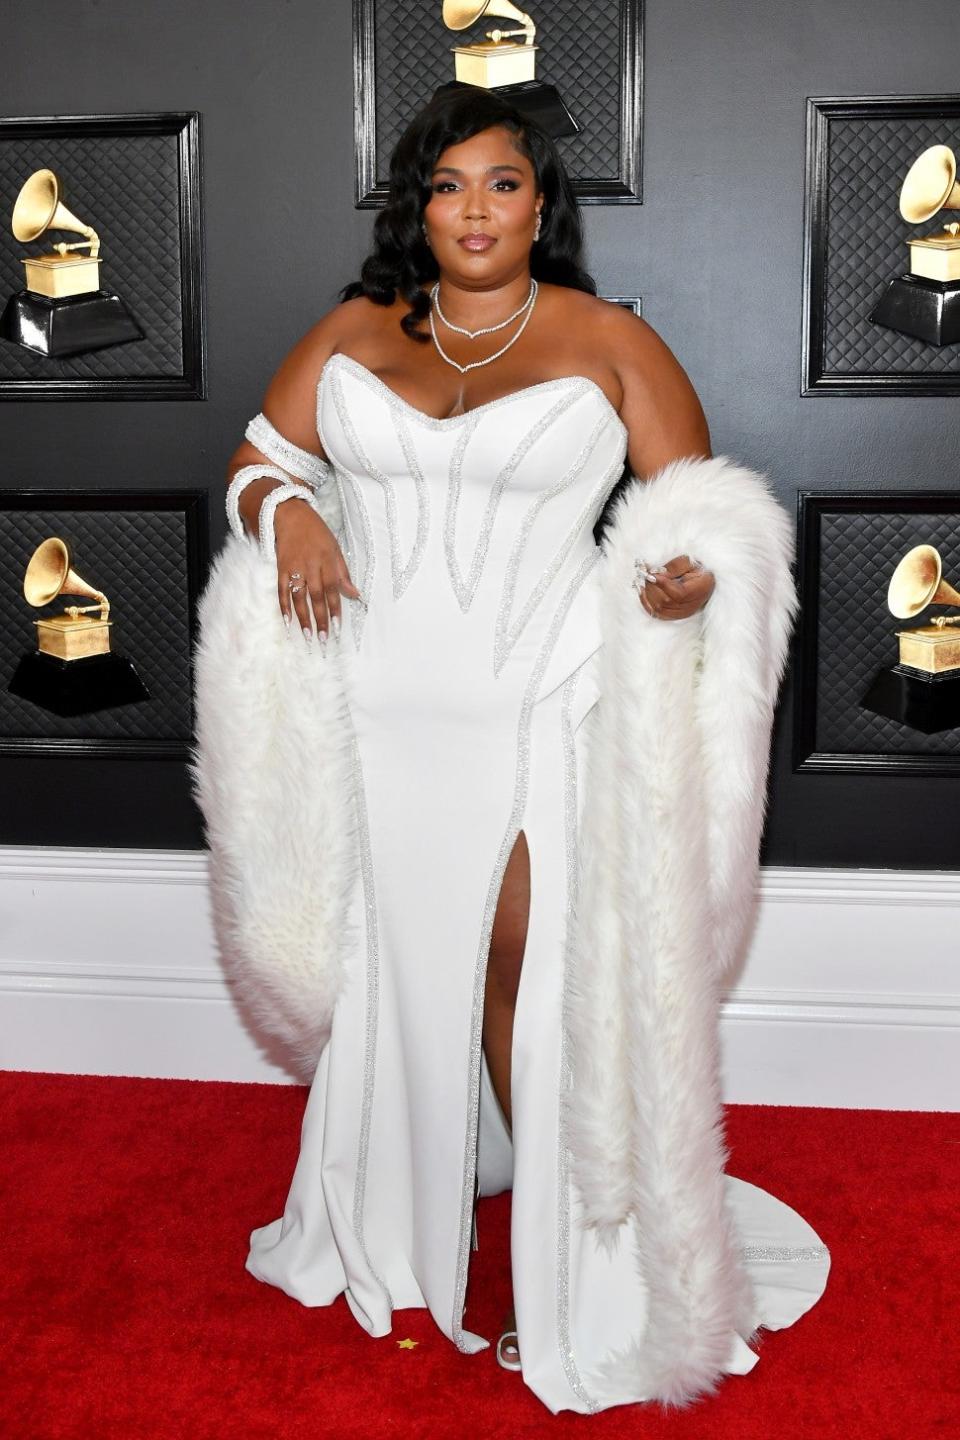 The 8-time nominee arrives on the red carpet at the 62nd annual GRAMMY Awards on Sunday.